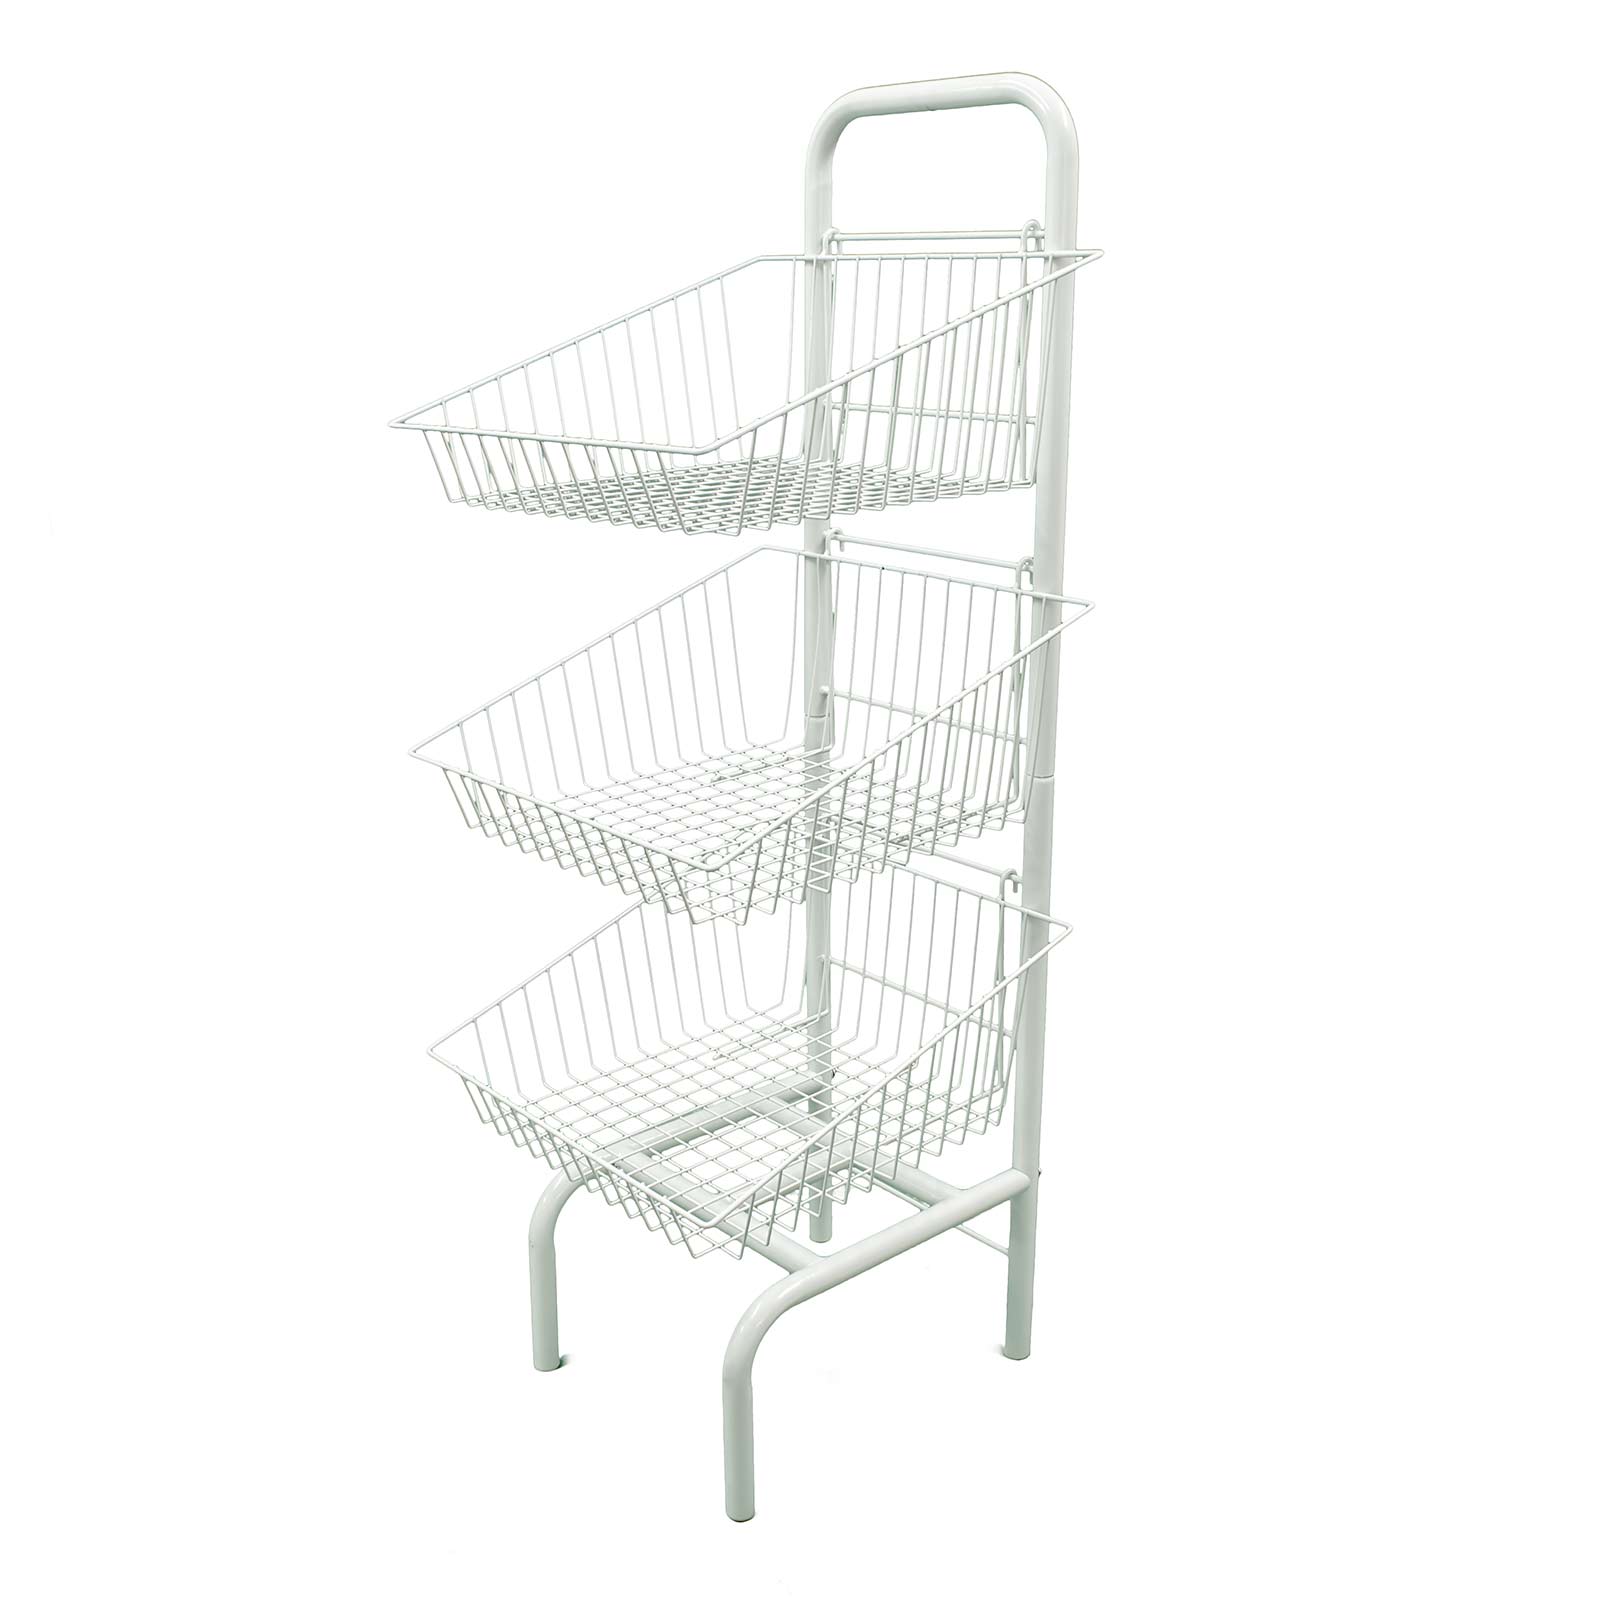 Q4 3 Basket Stand in White